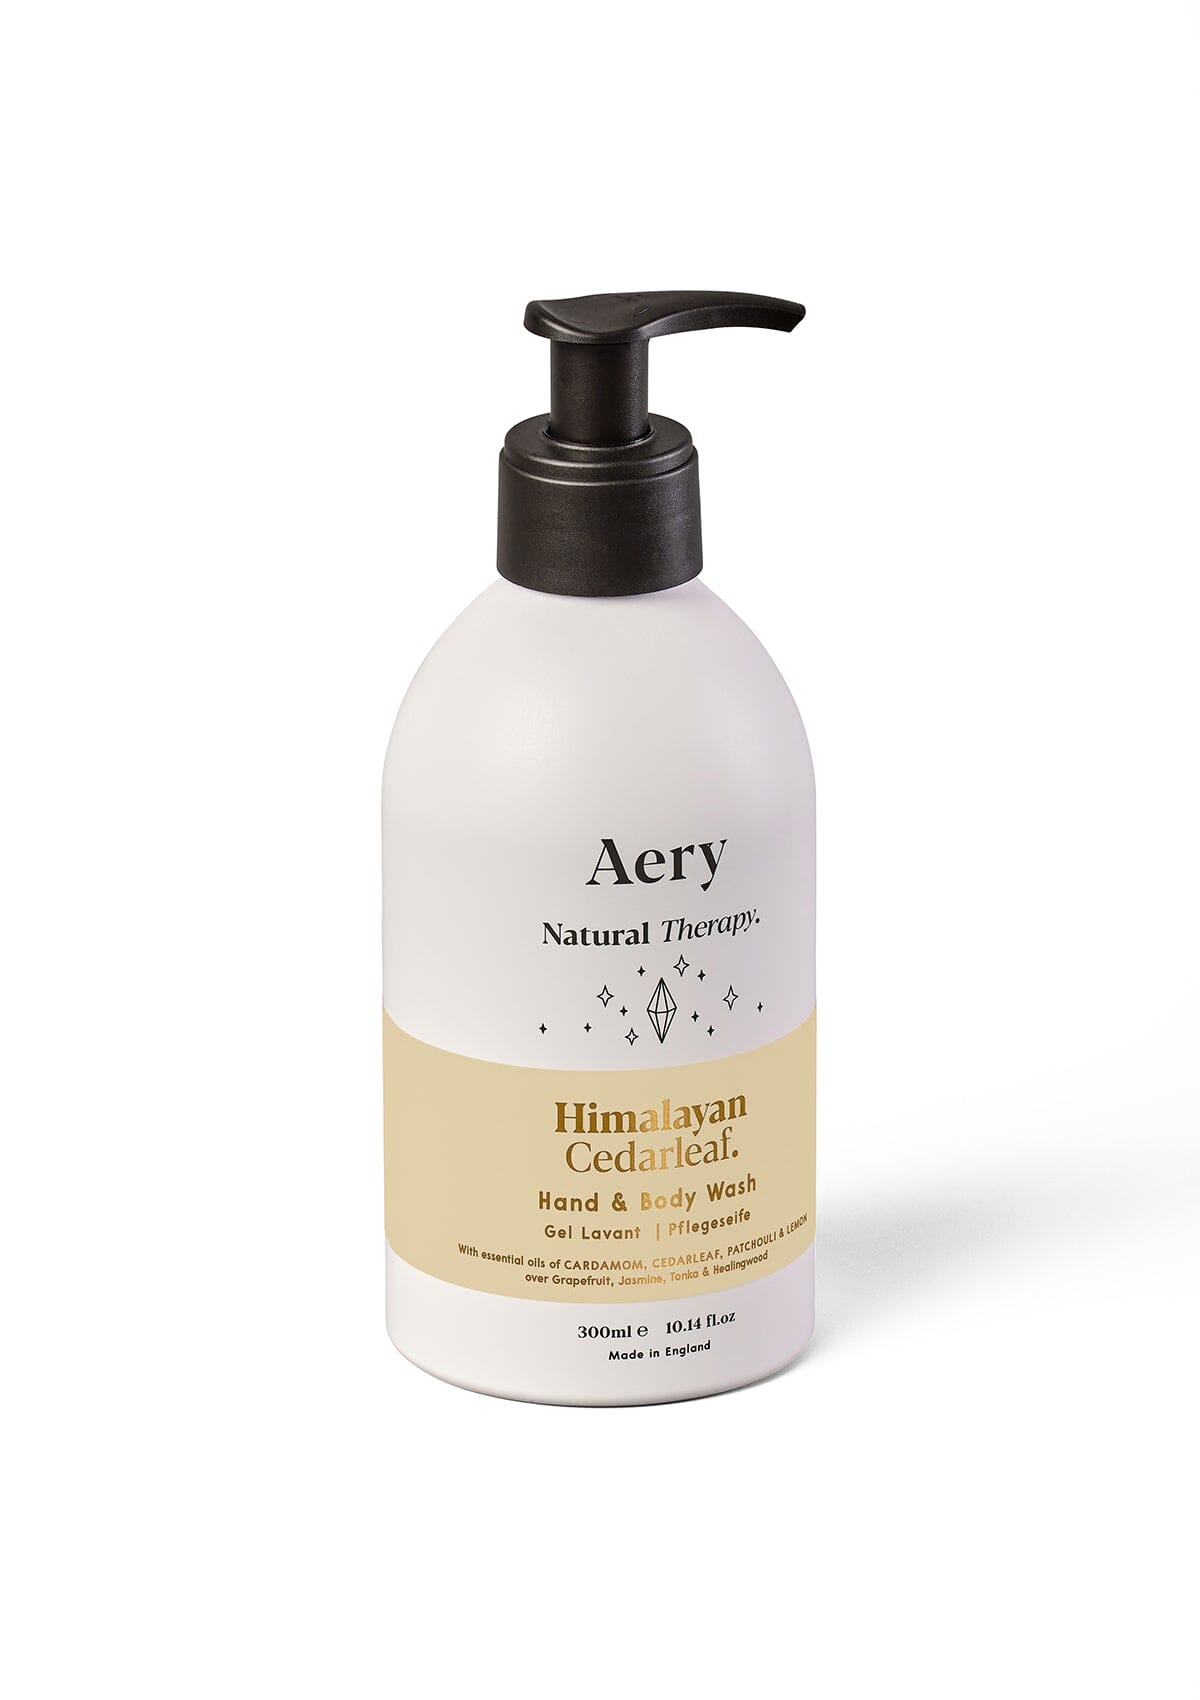 Cream Himalayan Cedarleaf  Hand and Body Wash by Aery displayed on white background